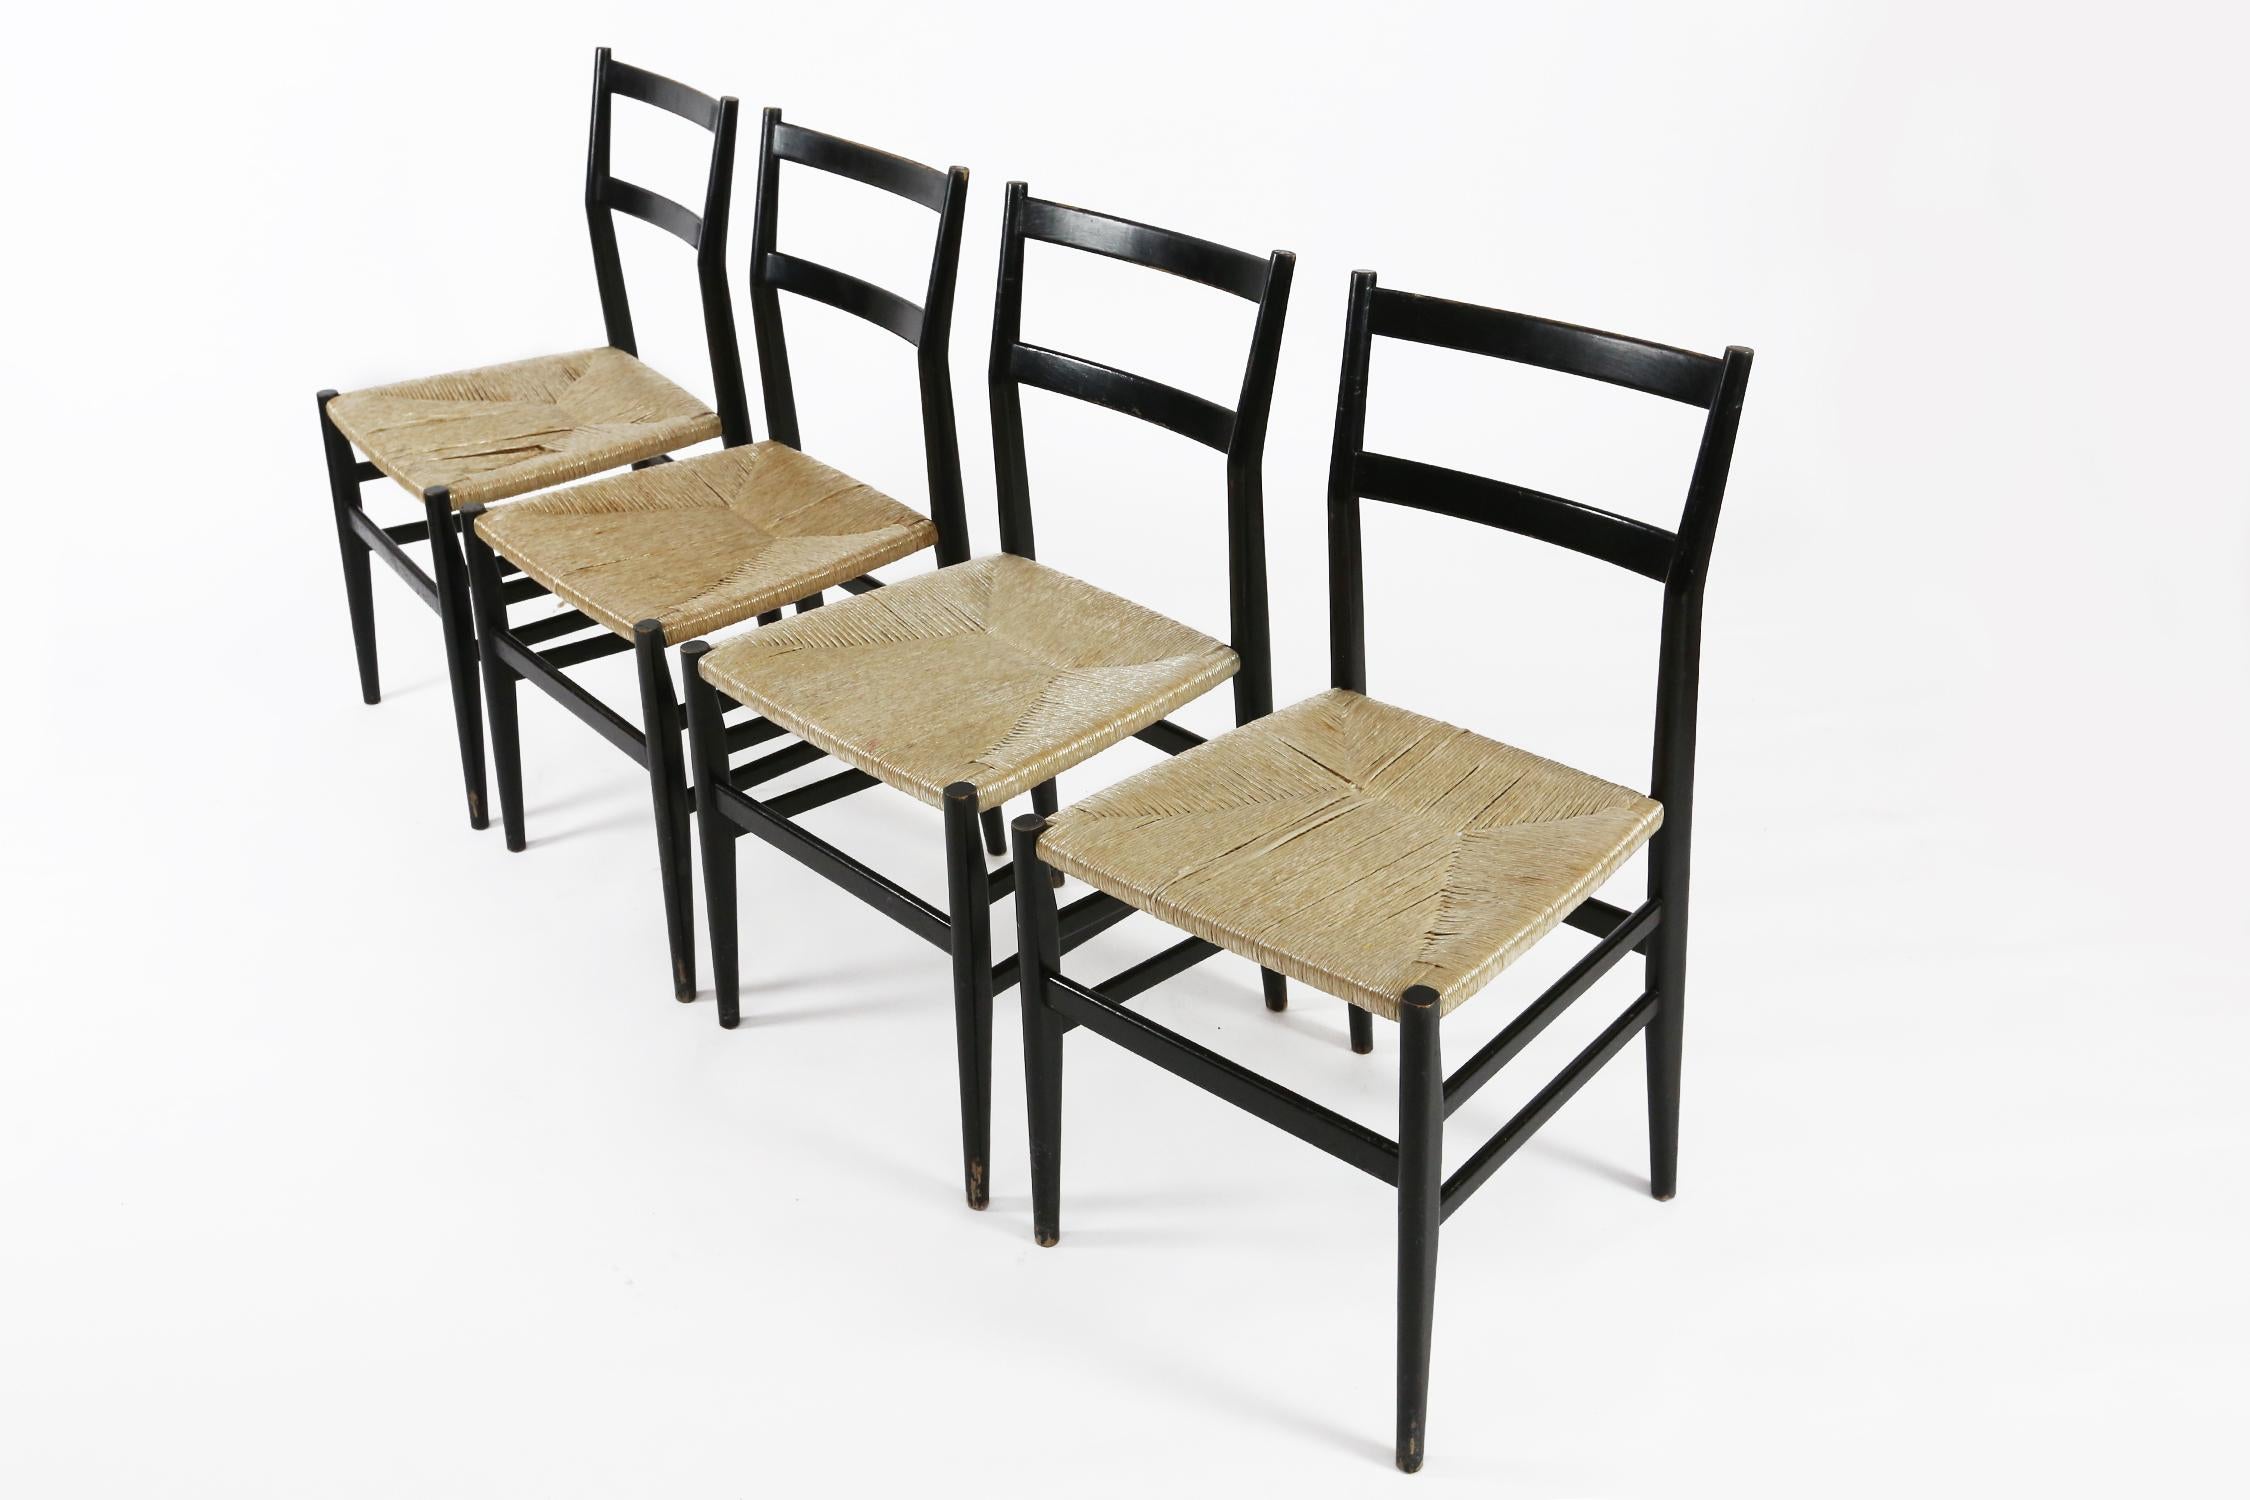 12 Leggera Chairs by Gio Ponti by Cassina, Milano, 1960s For Sale 7